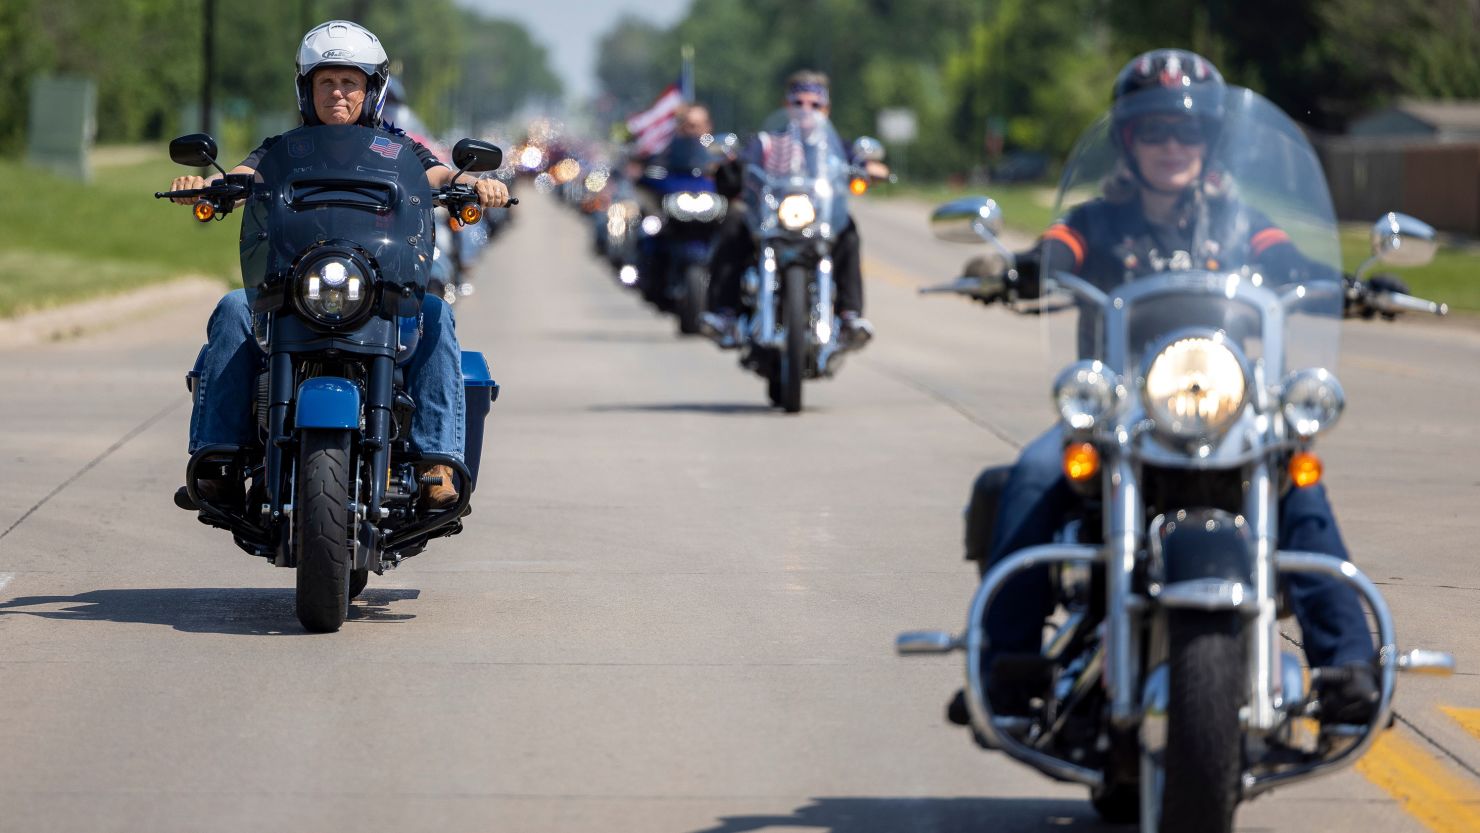 Former Vice President Mike Pence, left, and Iowa Sen. Joni Ernst, right, ride motorcycles during the annual "Roast and Ride" gathering in Des Moines on June 3, 2023. 